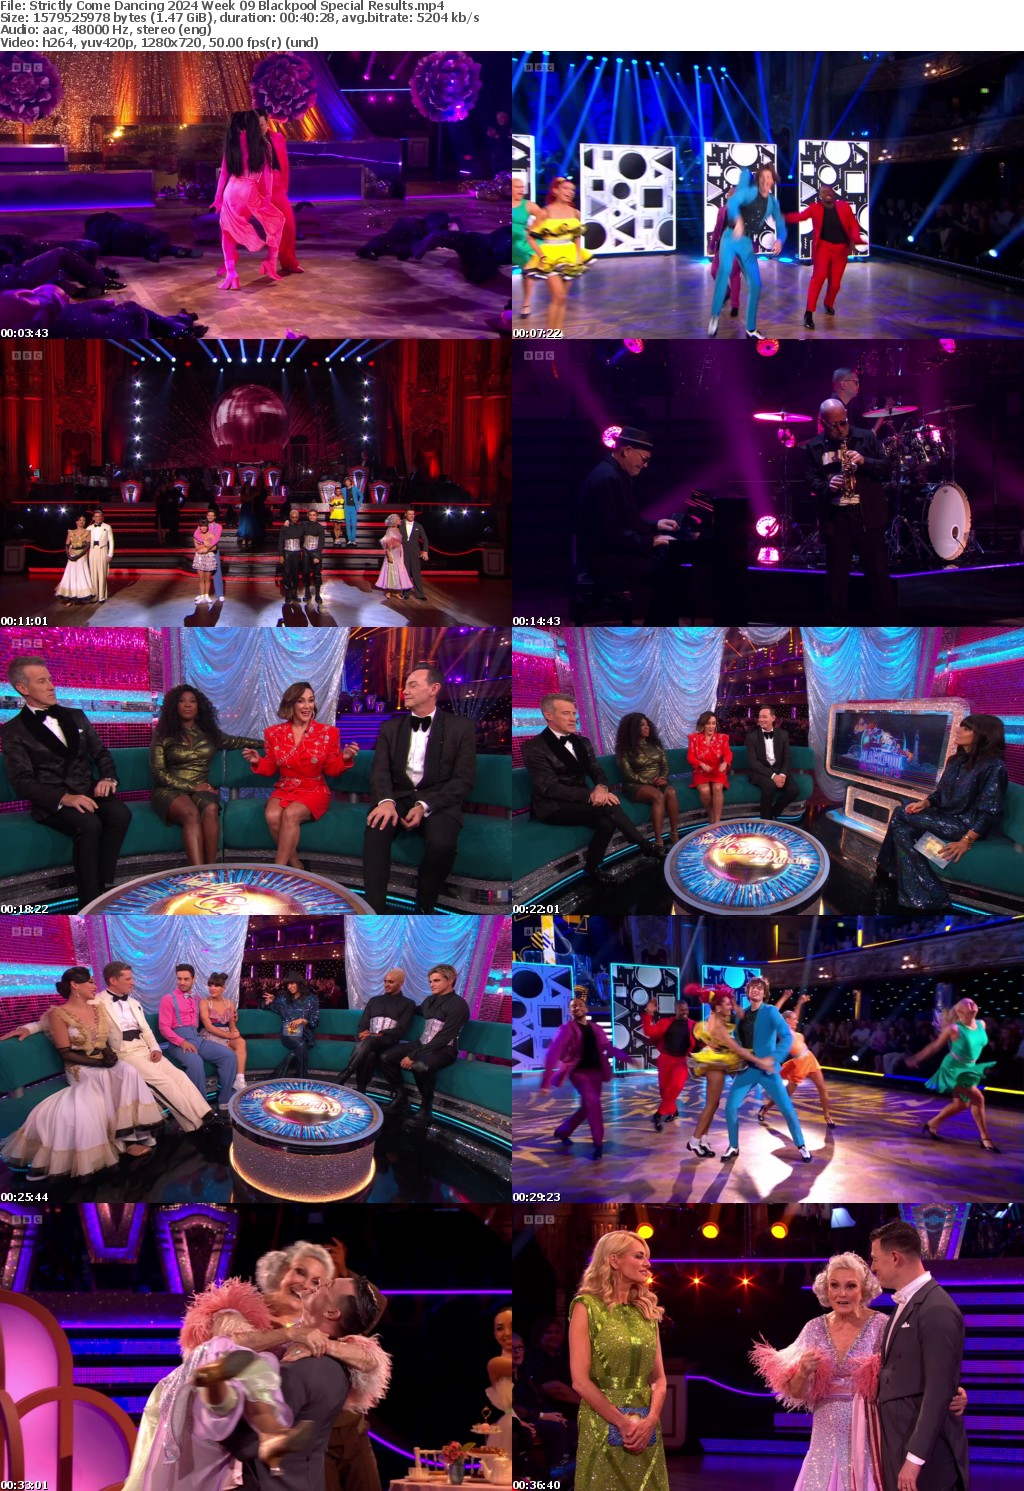 Strictly Come Dancing 2024 Week 09 Blackpool Special Results (1280x720p HD, 50fps, soft Eng subs)